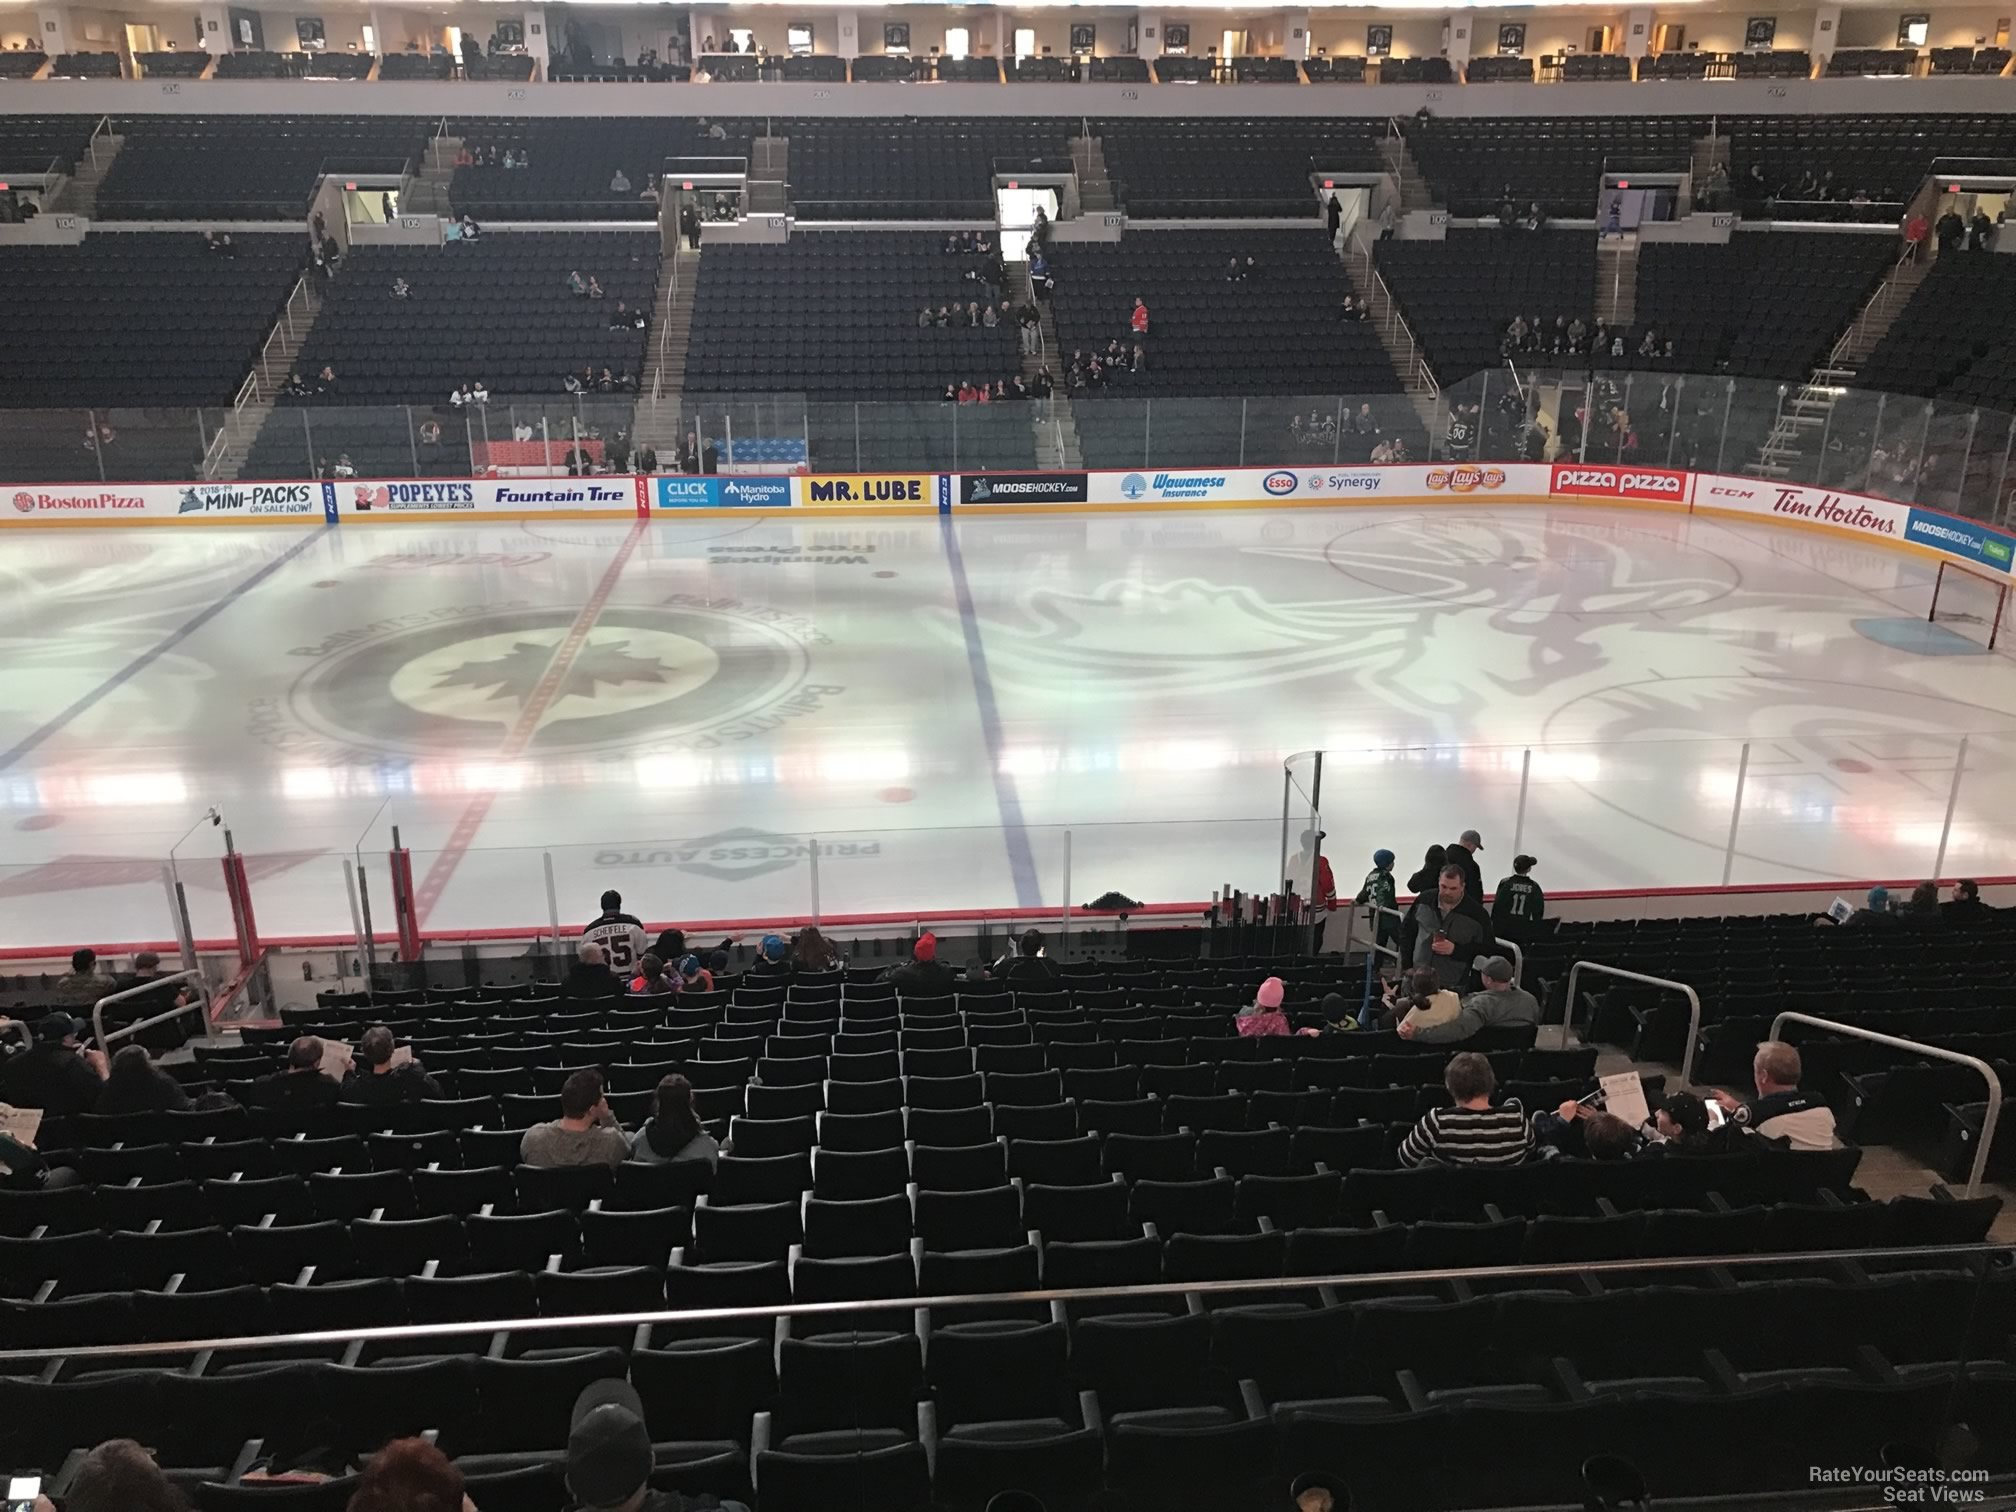 section 218, row 4 seat view  for hockey - canada life centre